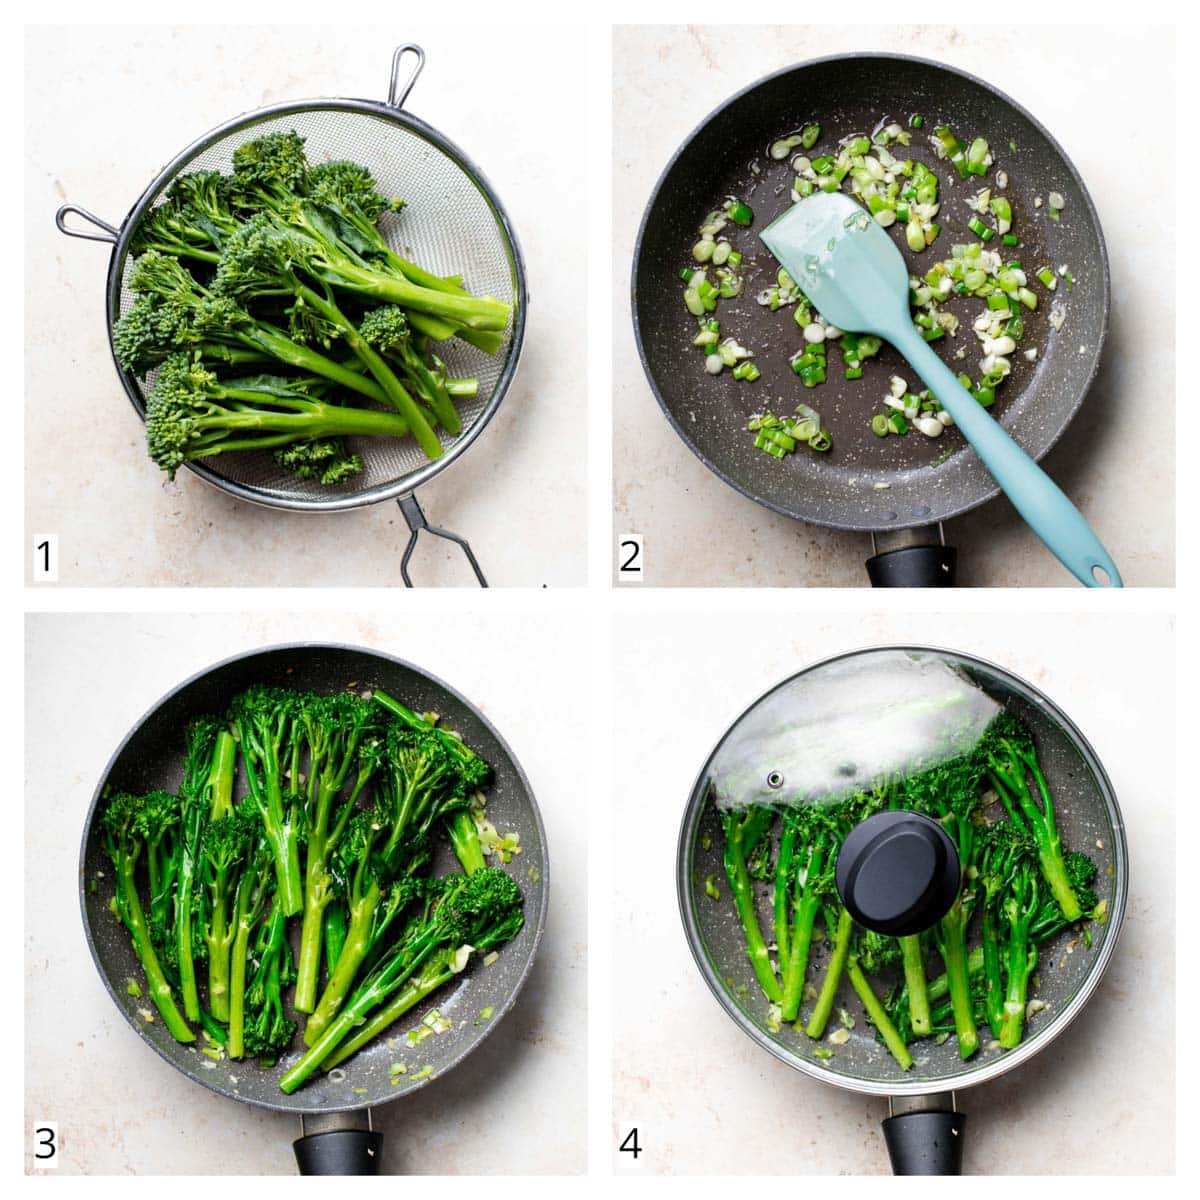 A collage of four images showing the different steps of making broccoli in a pan.